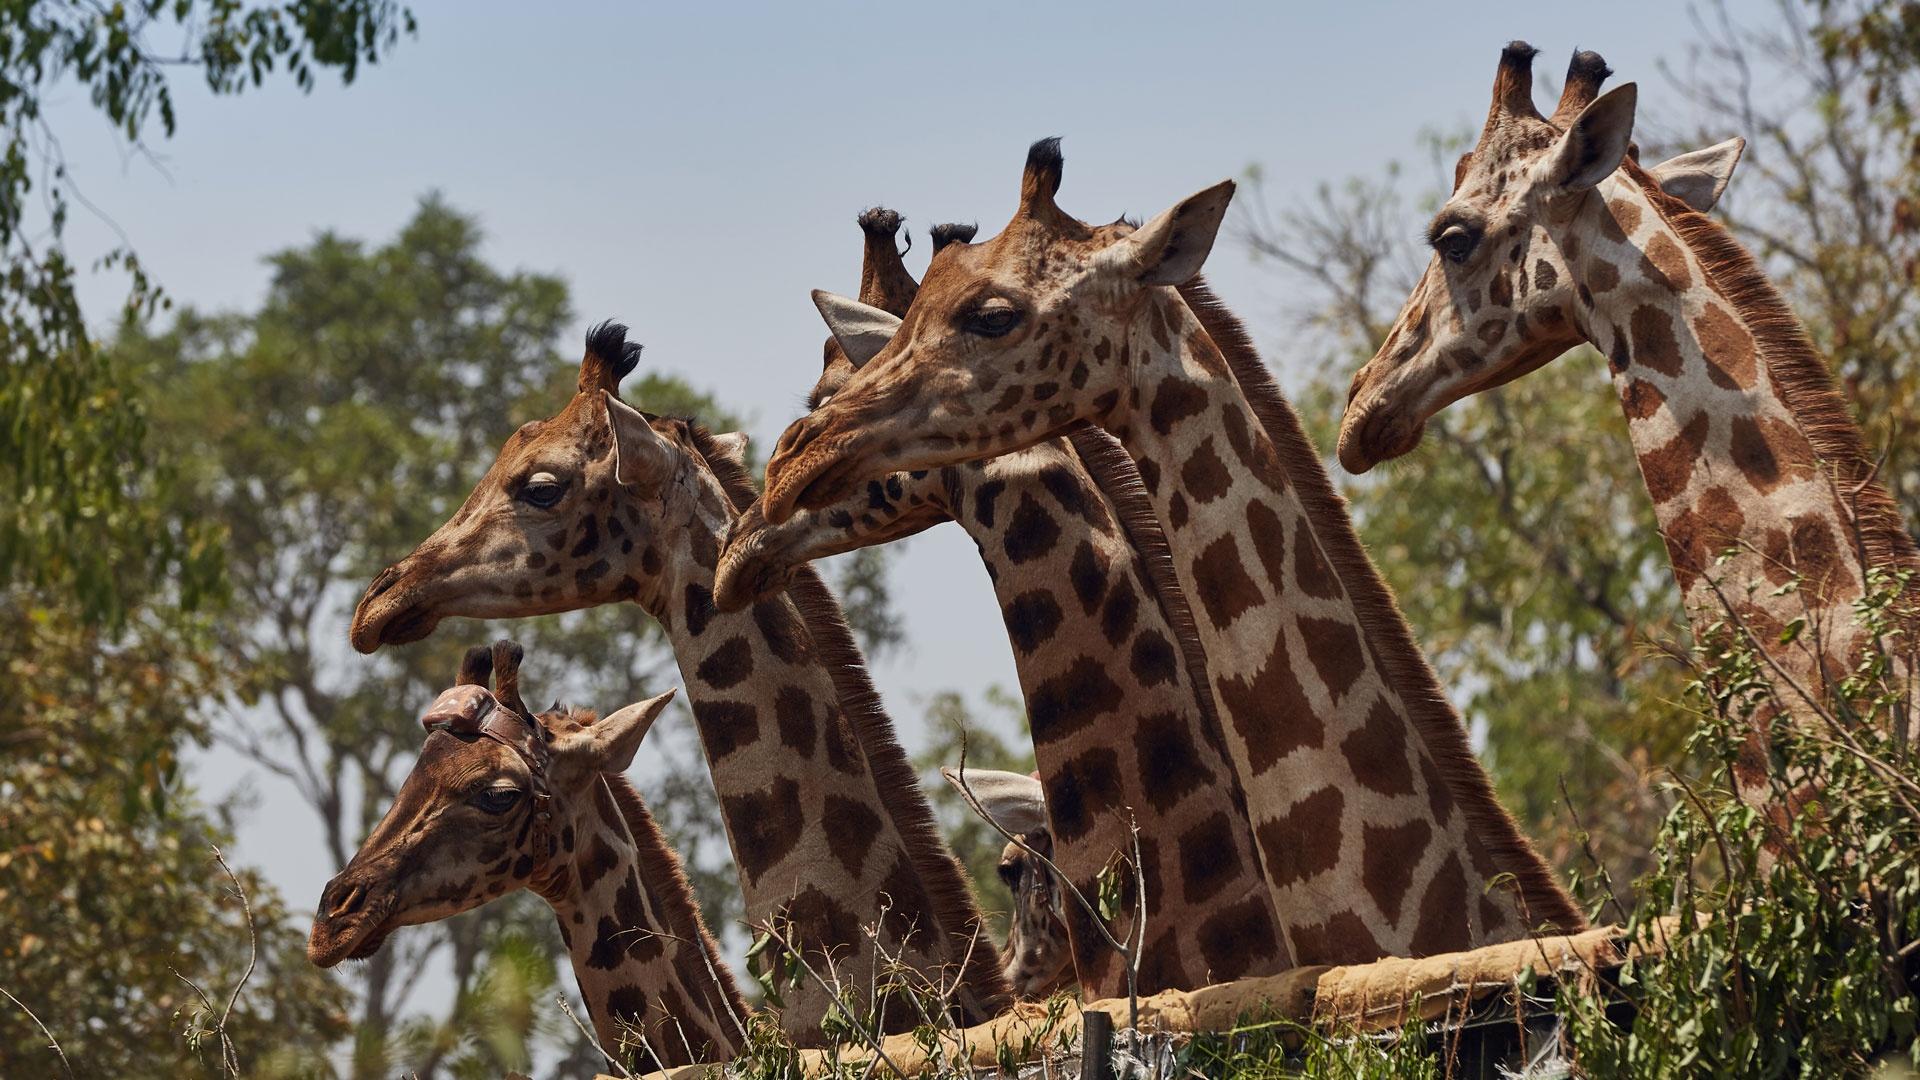 Six wild endangered Rothschild’s giraffes, one carrying a satellite transmitter, look out of the vehicle that has taken them to a new release site.